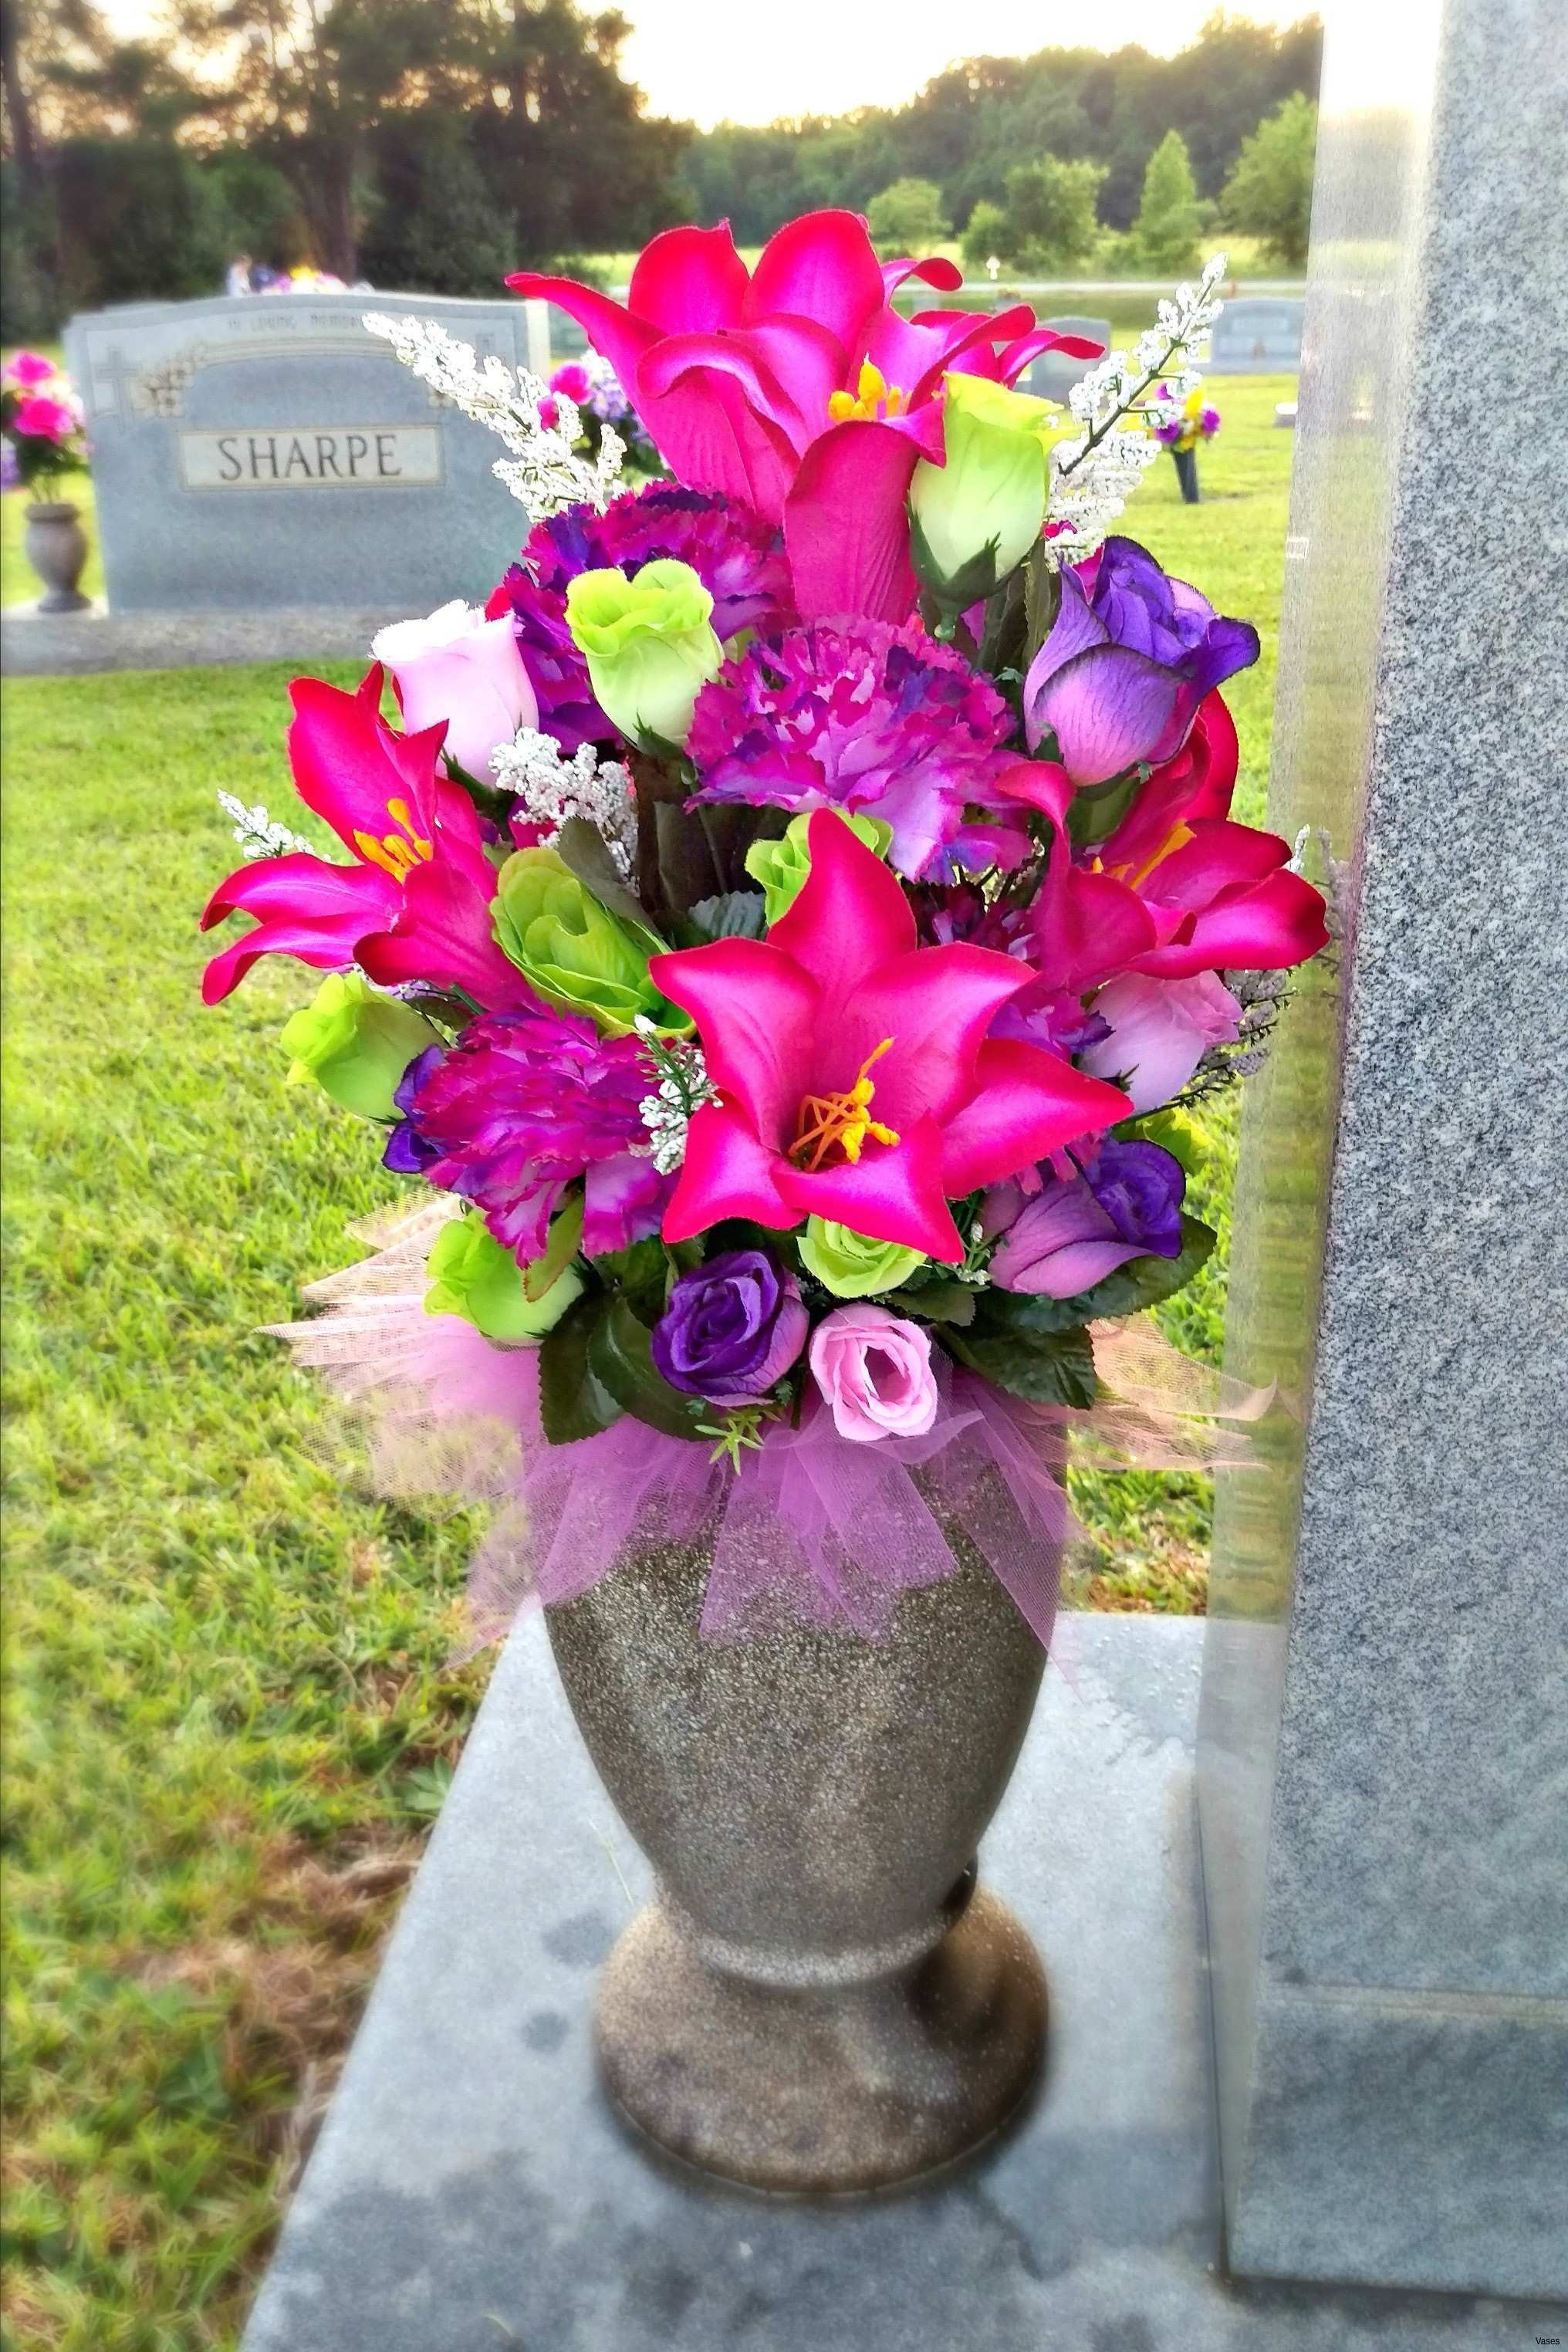 12 inch vase of cemetery flower holders in ground flowers healthy with rose bushes best of vases grave flower vase cemetery informationi 0d in ground holders